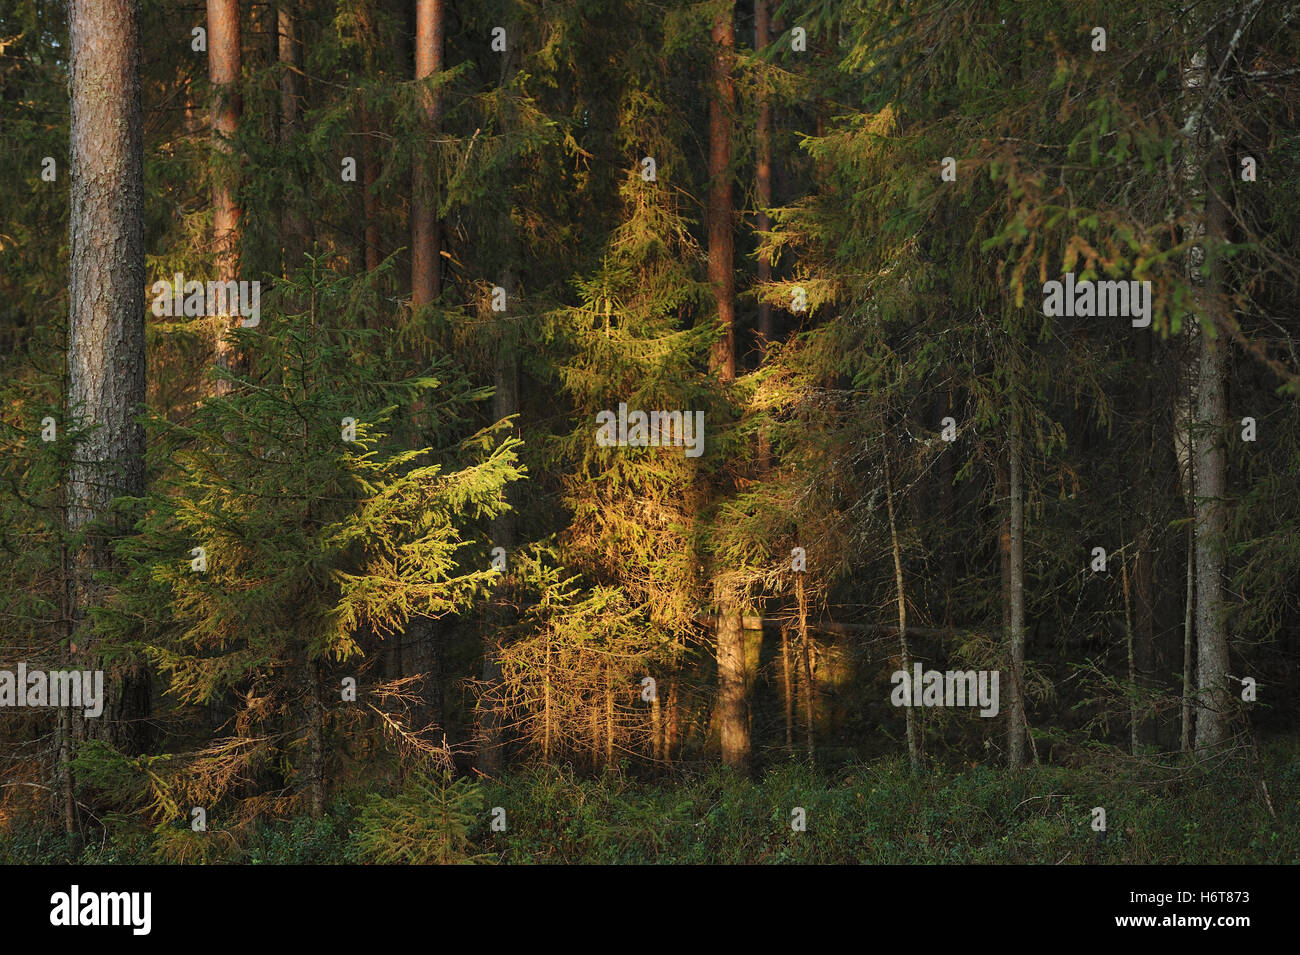 Landscape. Trees in the taiga forest. Stock Photo